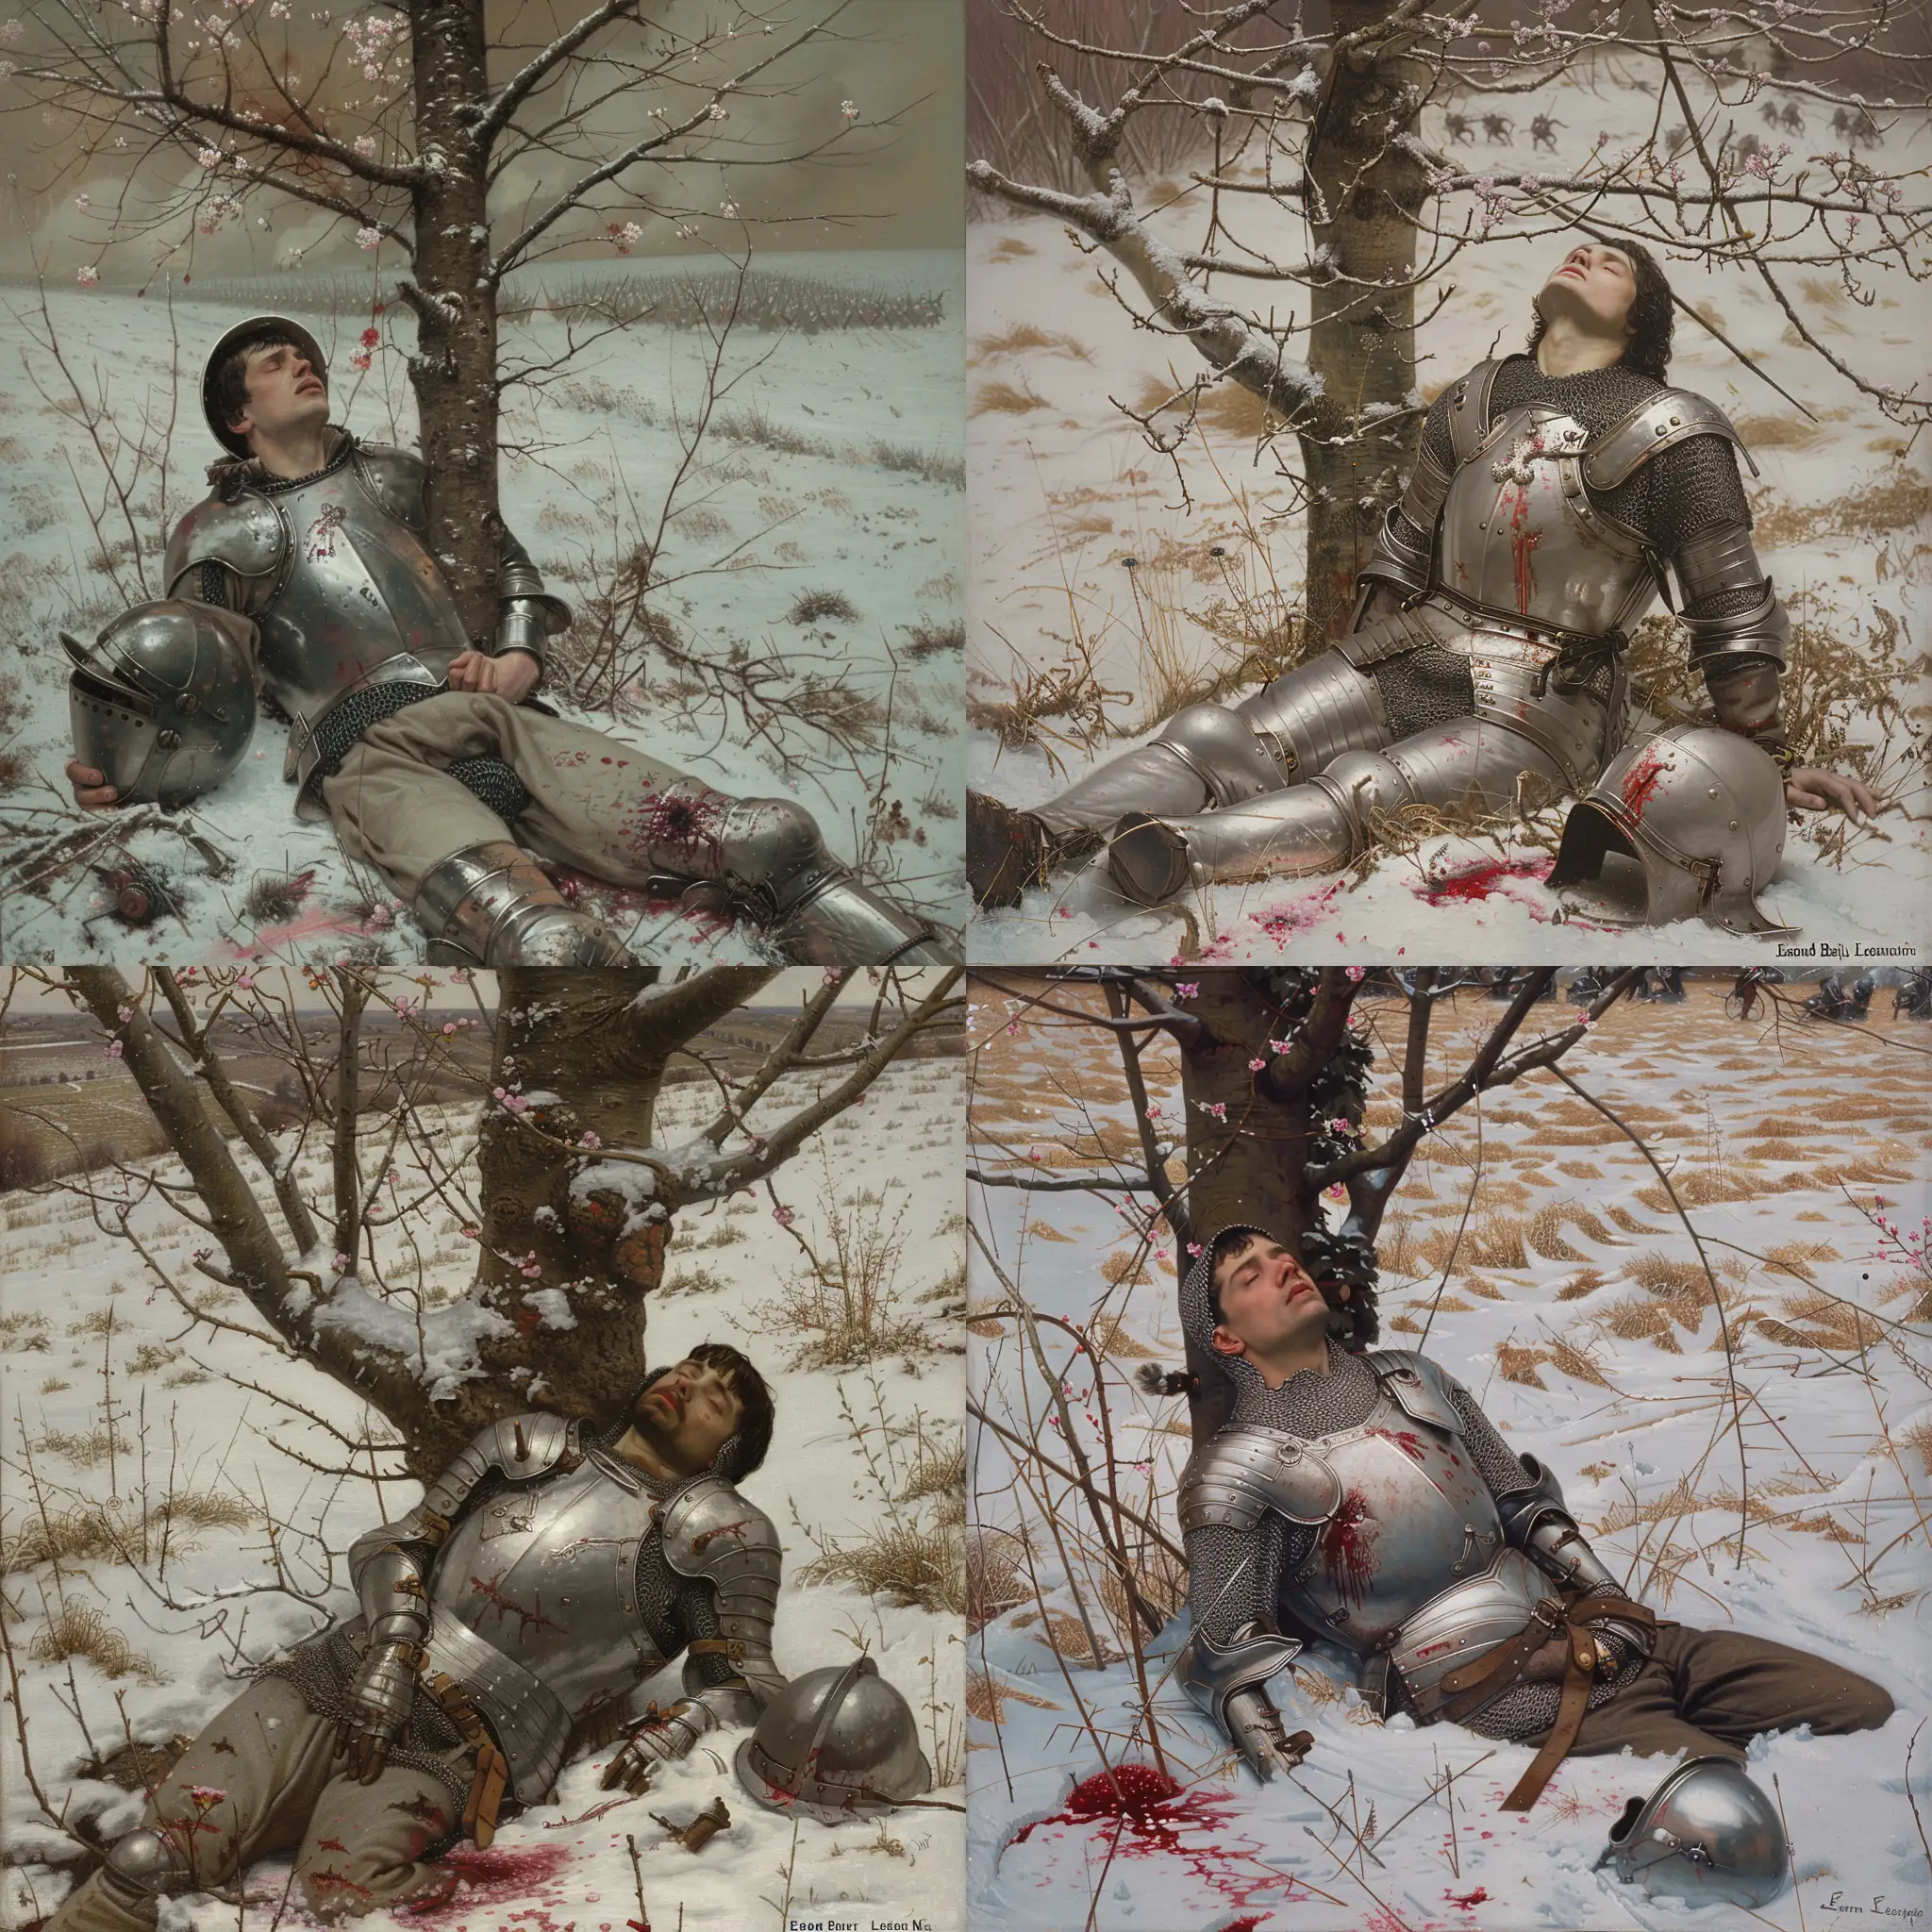 A detailed pre Raphaelite image of a field covered in snow. . At the front a medieval soldier in silver armour sitting propped up on a tree with his eyes closed. He is dying. His helmet is next to him and his eyes are closed. There is deep snow on the ground and some bright blood around him. The tree is bare apart from a few pink blossom. The top branches reach upwards. The battle  is can be seen continuing in the distance. Beautiful magical mysterious fantasy surreal highly detailed. Edmund Blair Leighton 